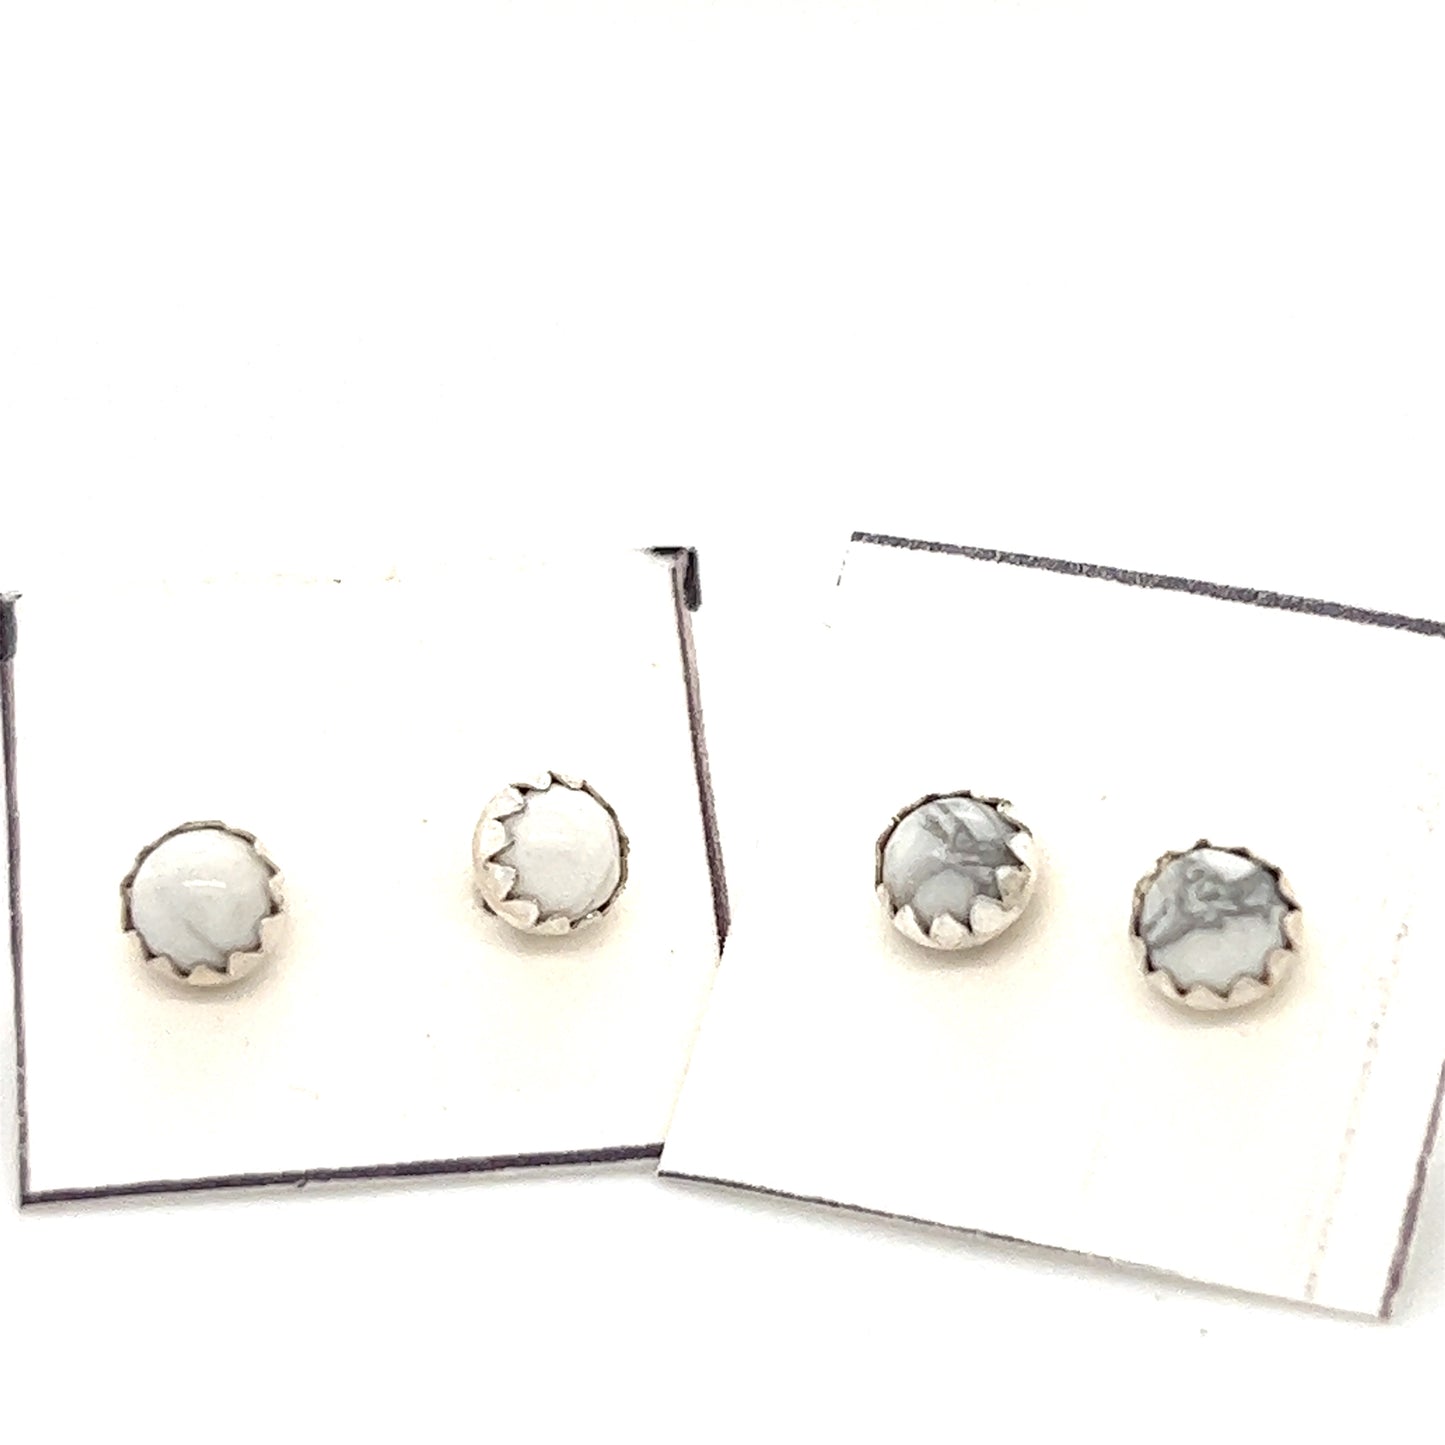 Super Silver's Handcrafted White Buffalo Studs are delicately crafted in Native American style on a white background.